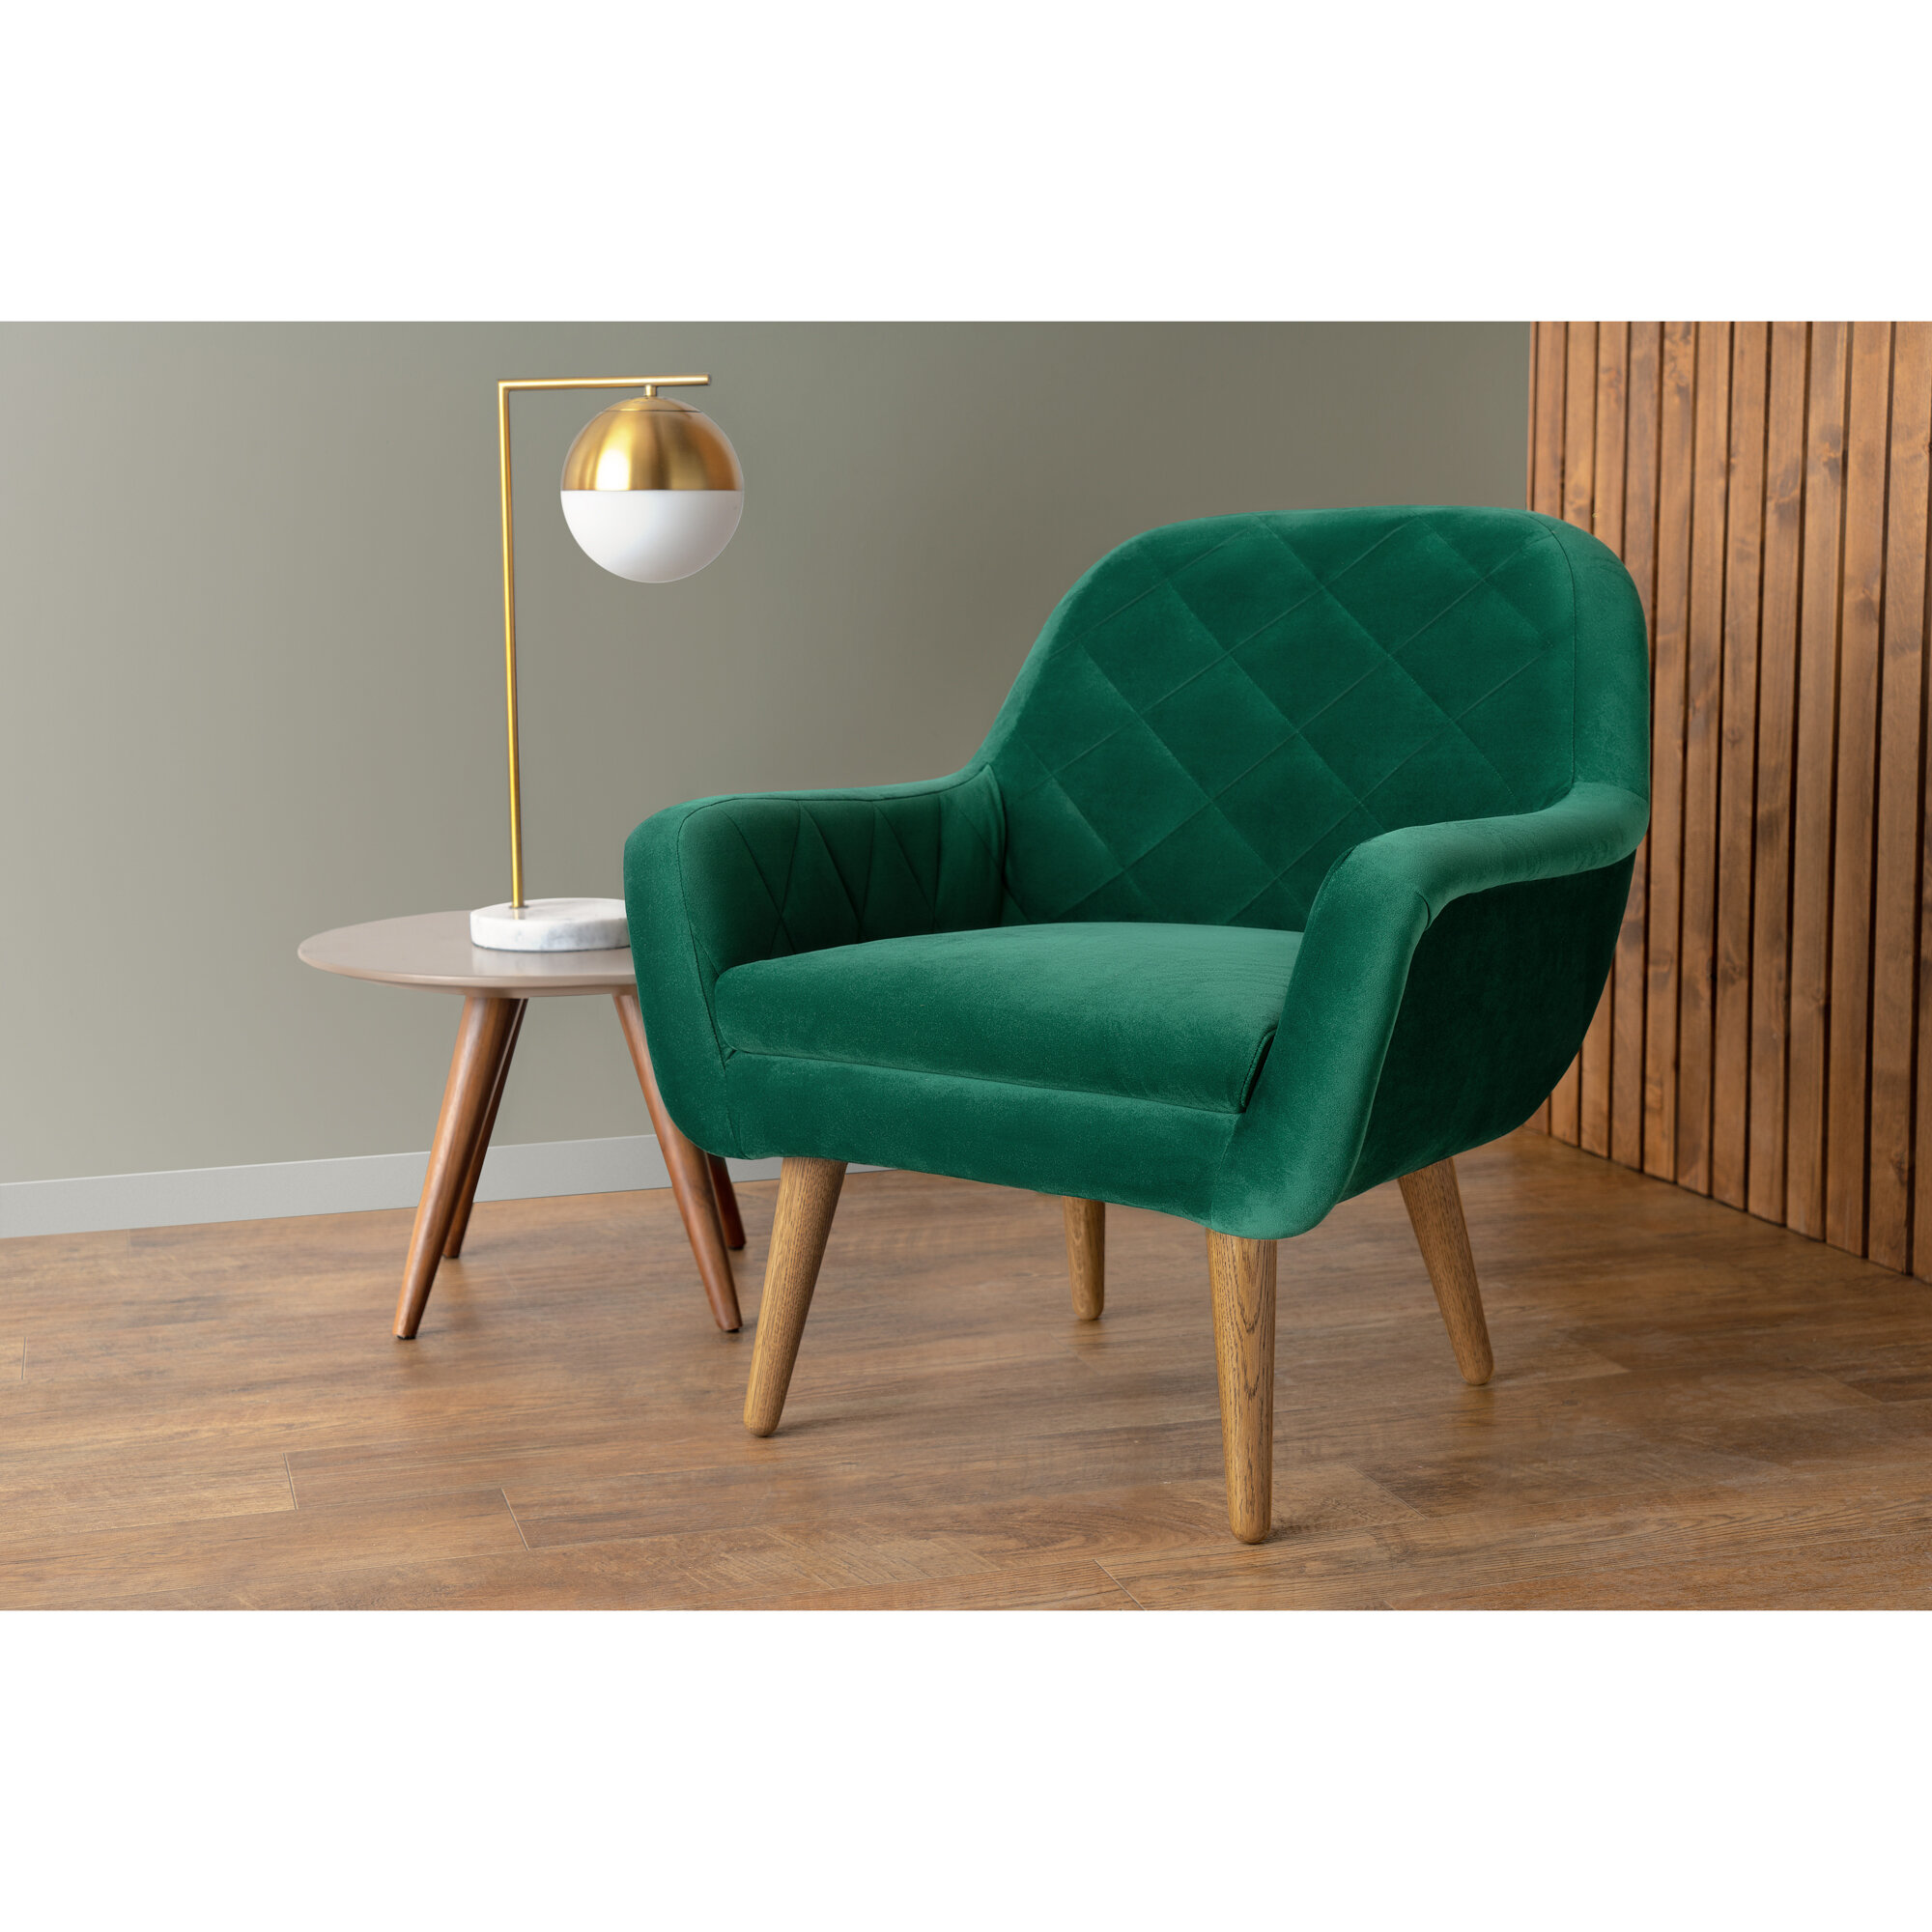 Soft Comfortable /& Lightweight with a Removeable Cover Comfortable 100/% Cotton Single Fold Out Cube Bed Chair Stool Pouffe Futon in Turquoise Available in 12 Colours.